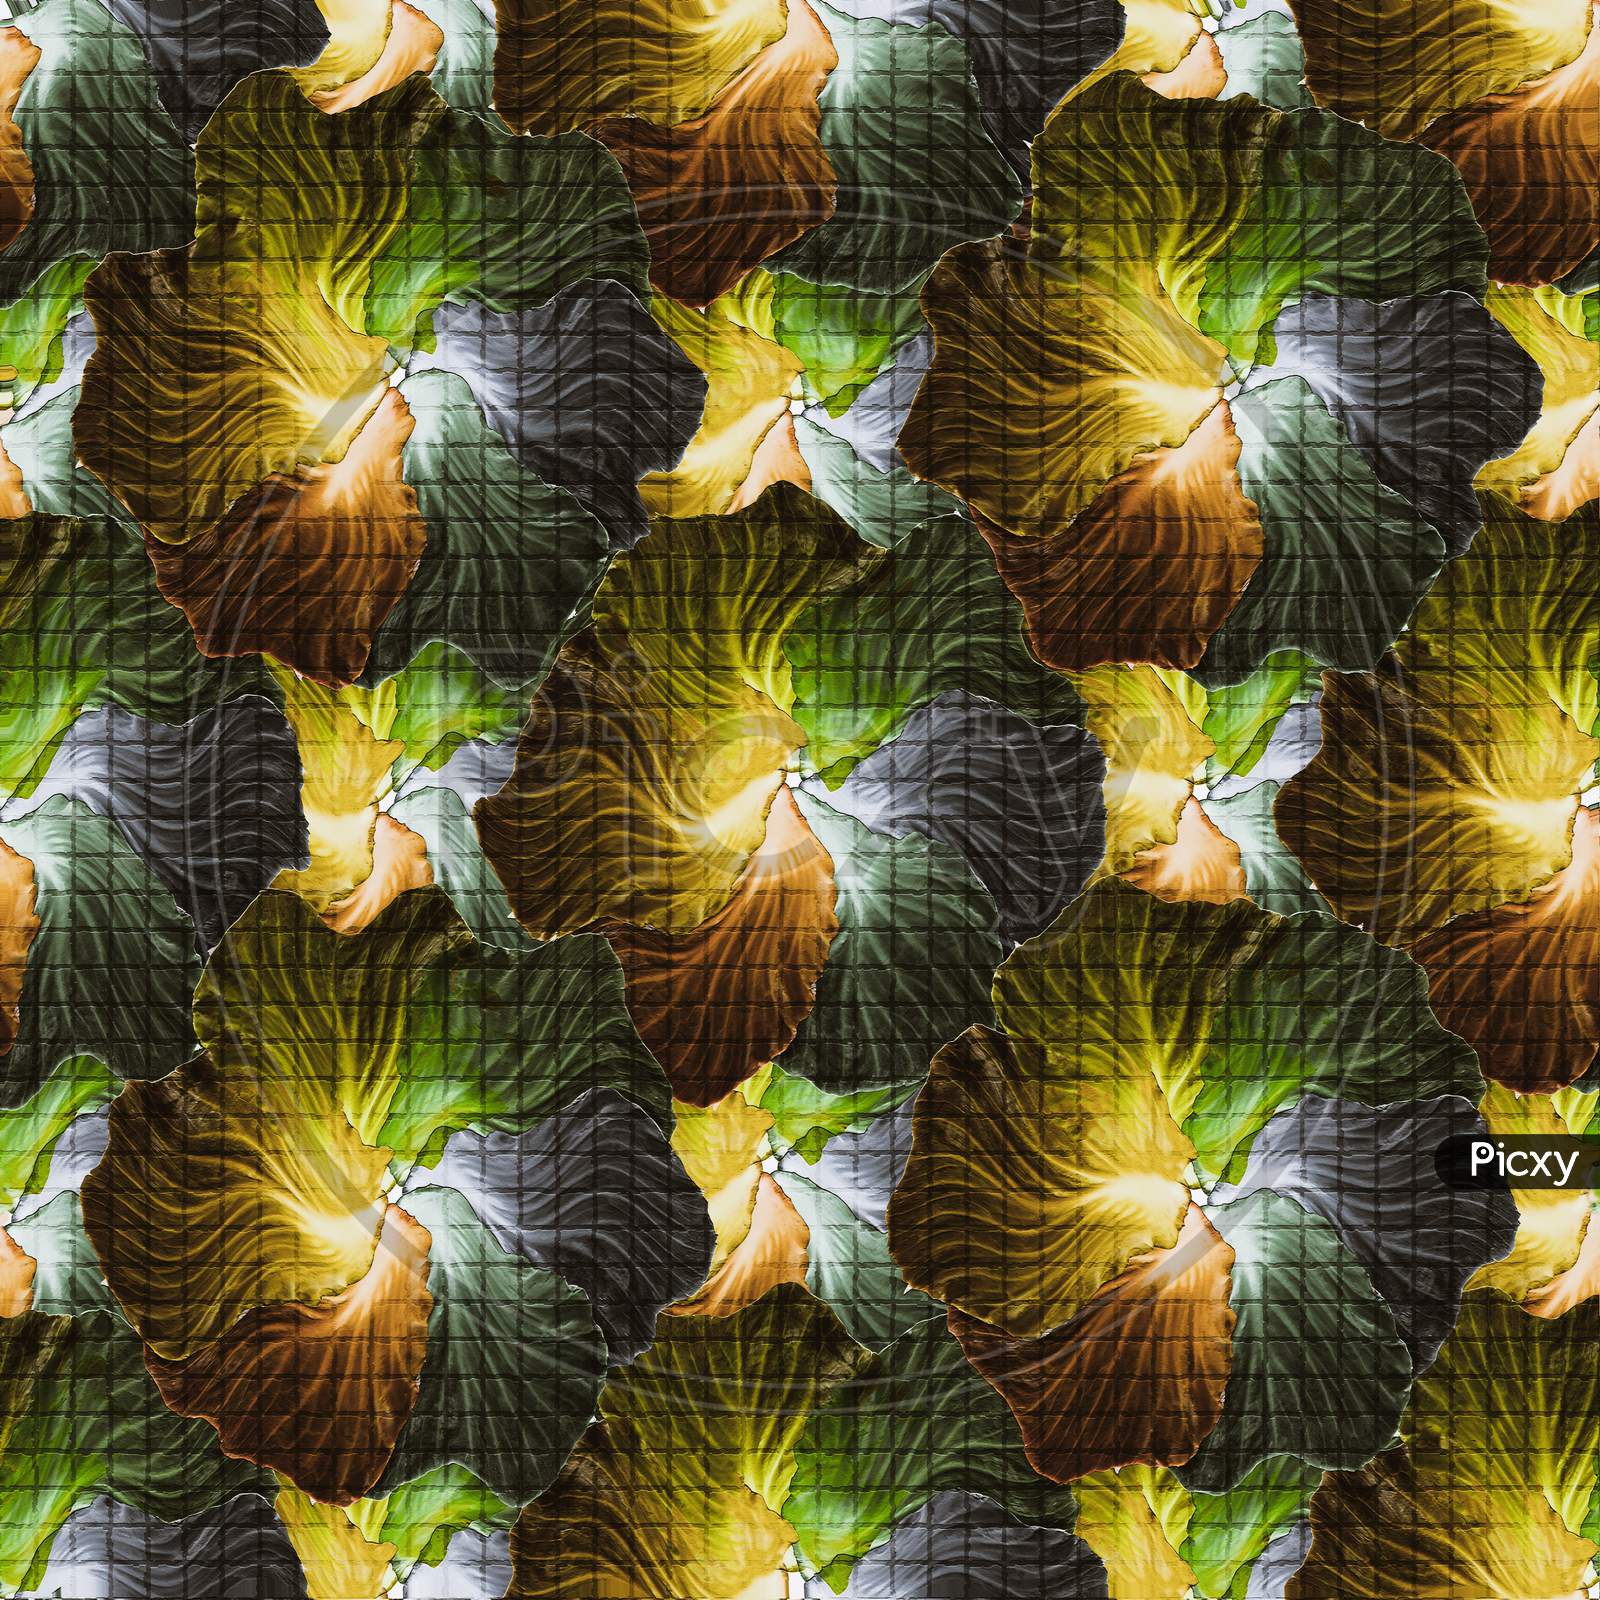 Colorful Tile Able Seamless Pattern With Cabbage Flower